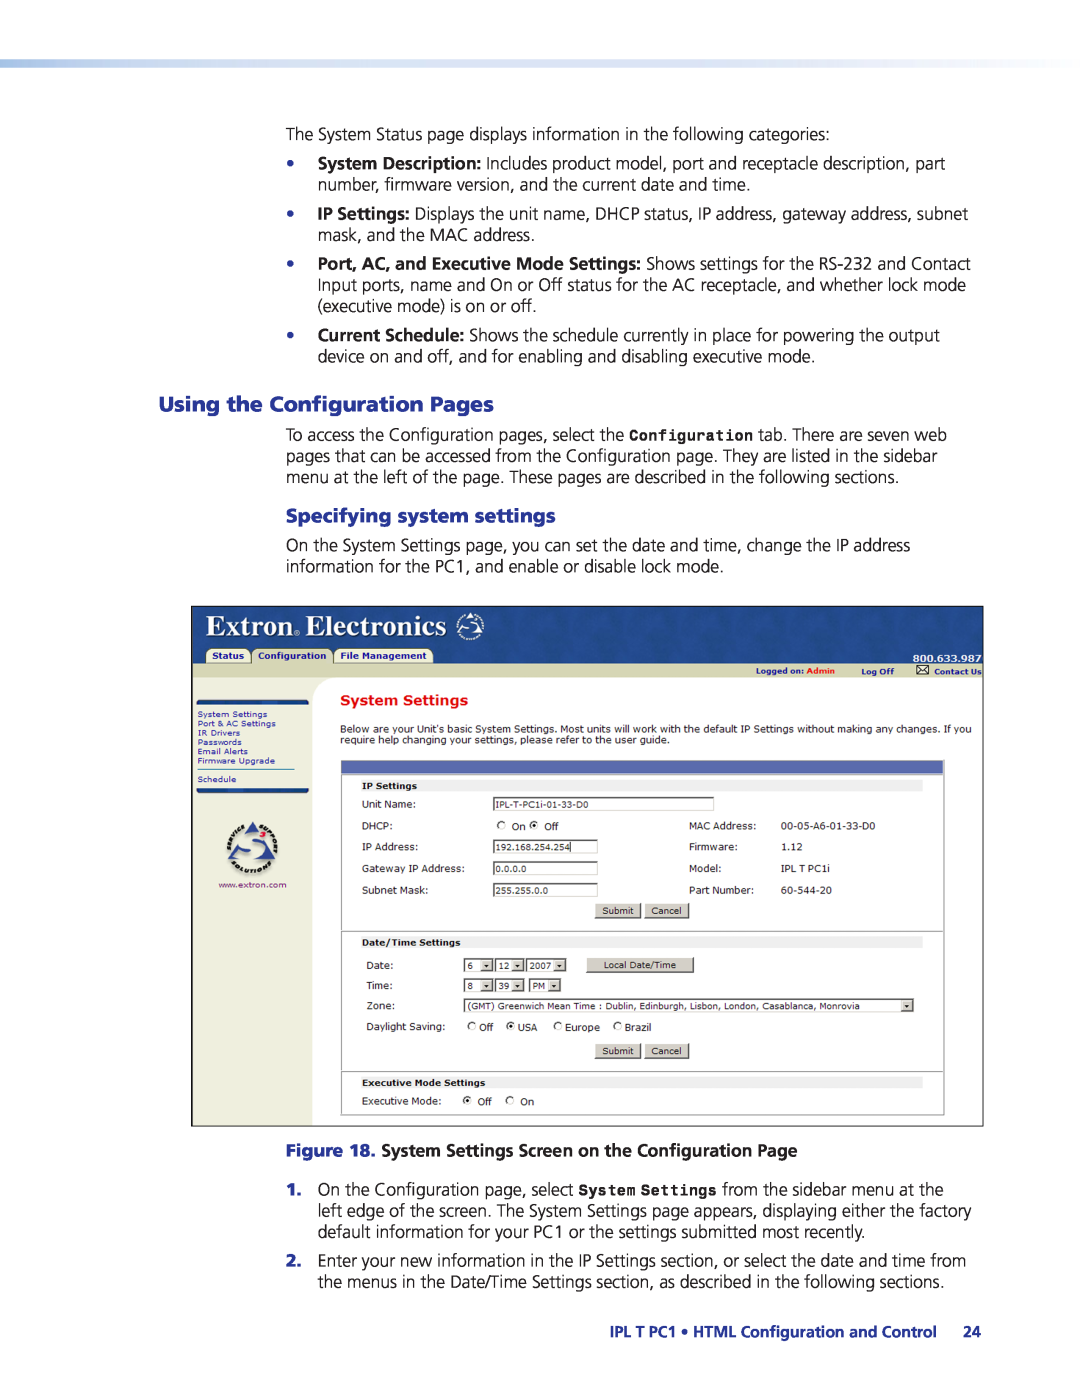 Extron electronic IPL T PC1i manual Using the Configuration Pages, Specifying system settings 